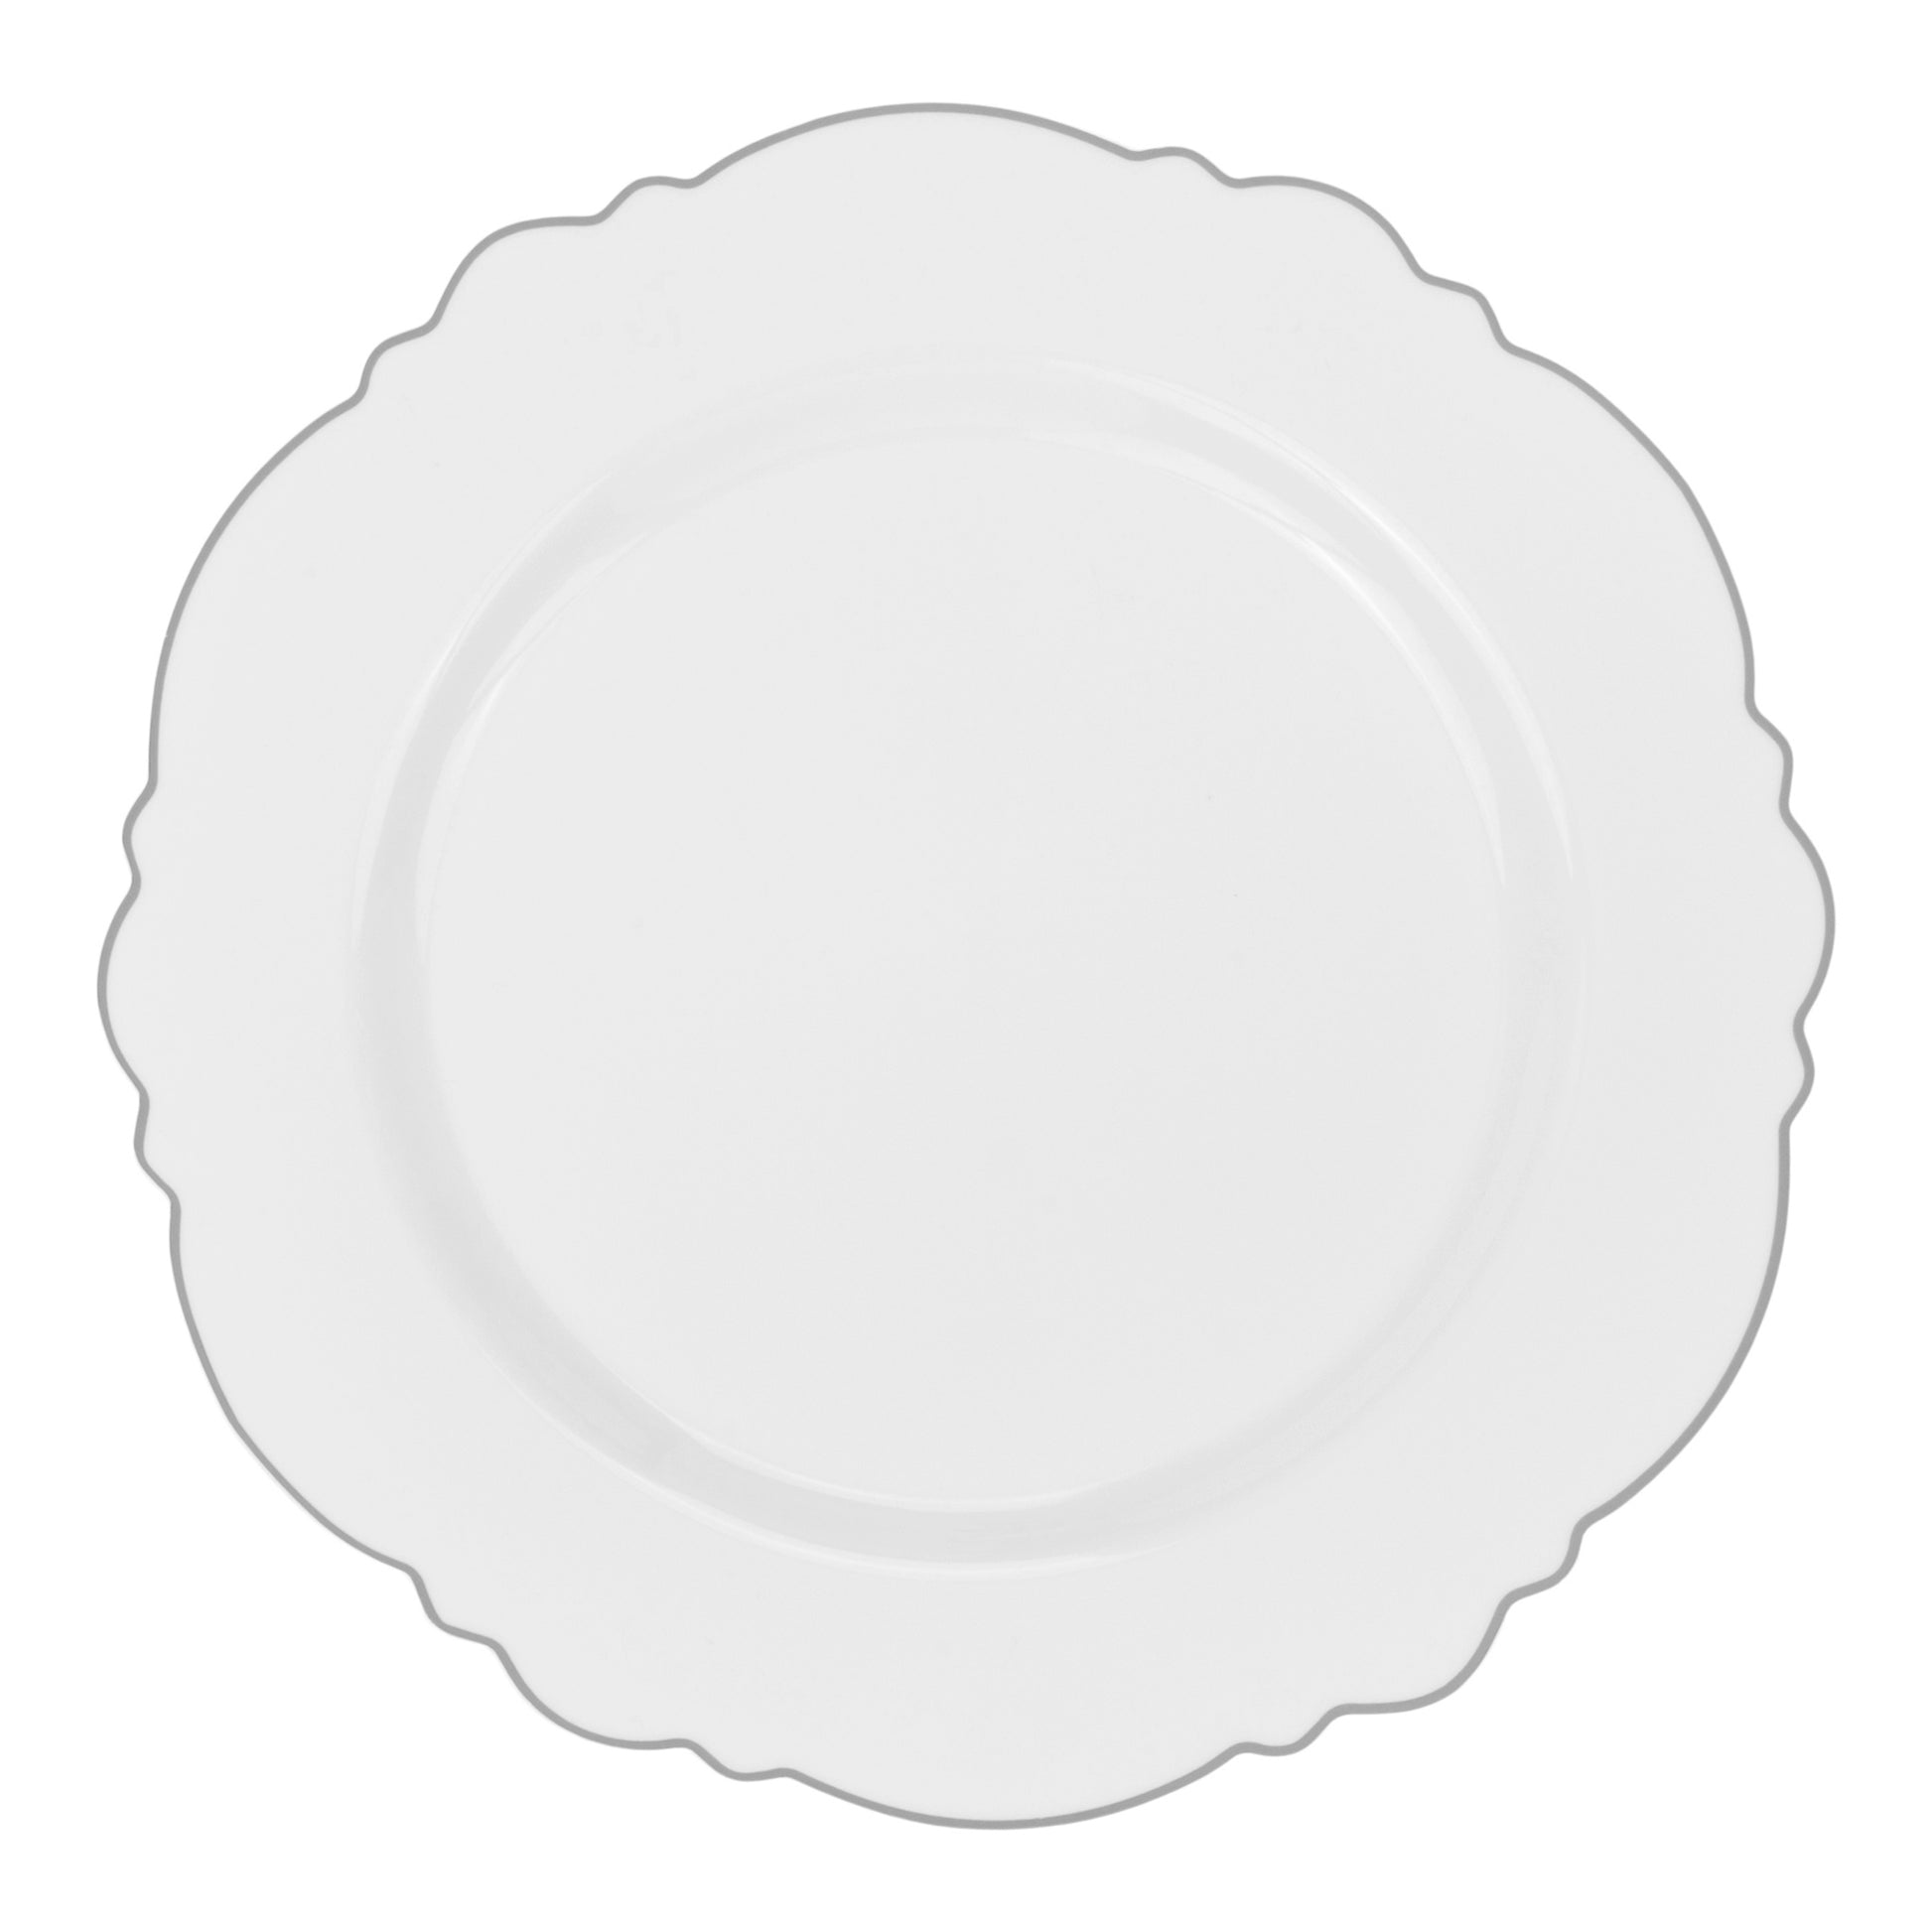 Scallop Disposable Plastic Plates 40 pcs Combo Pack - White Silver-Trimmed